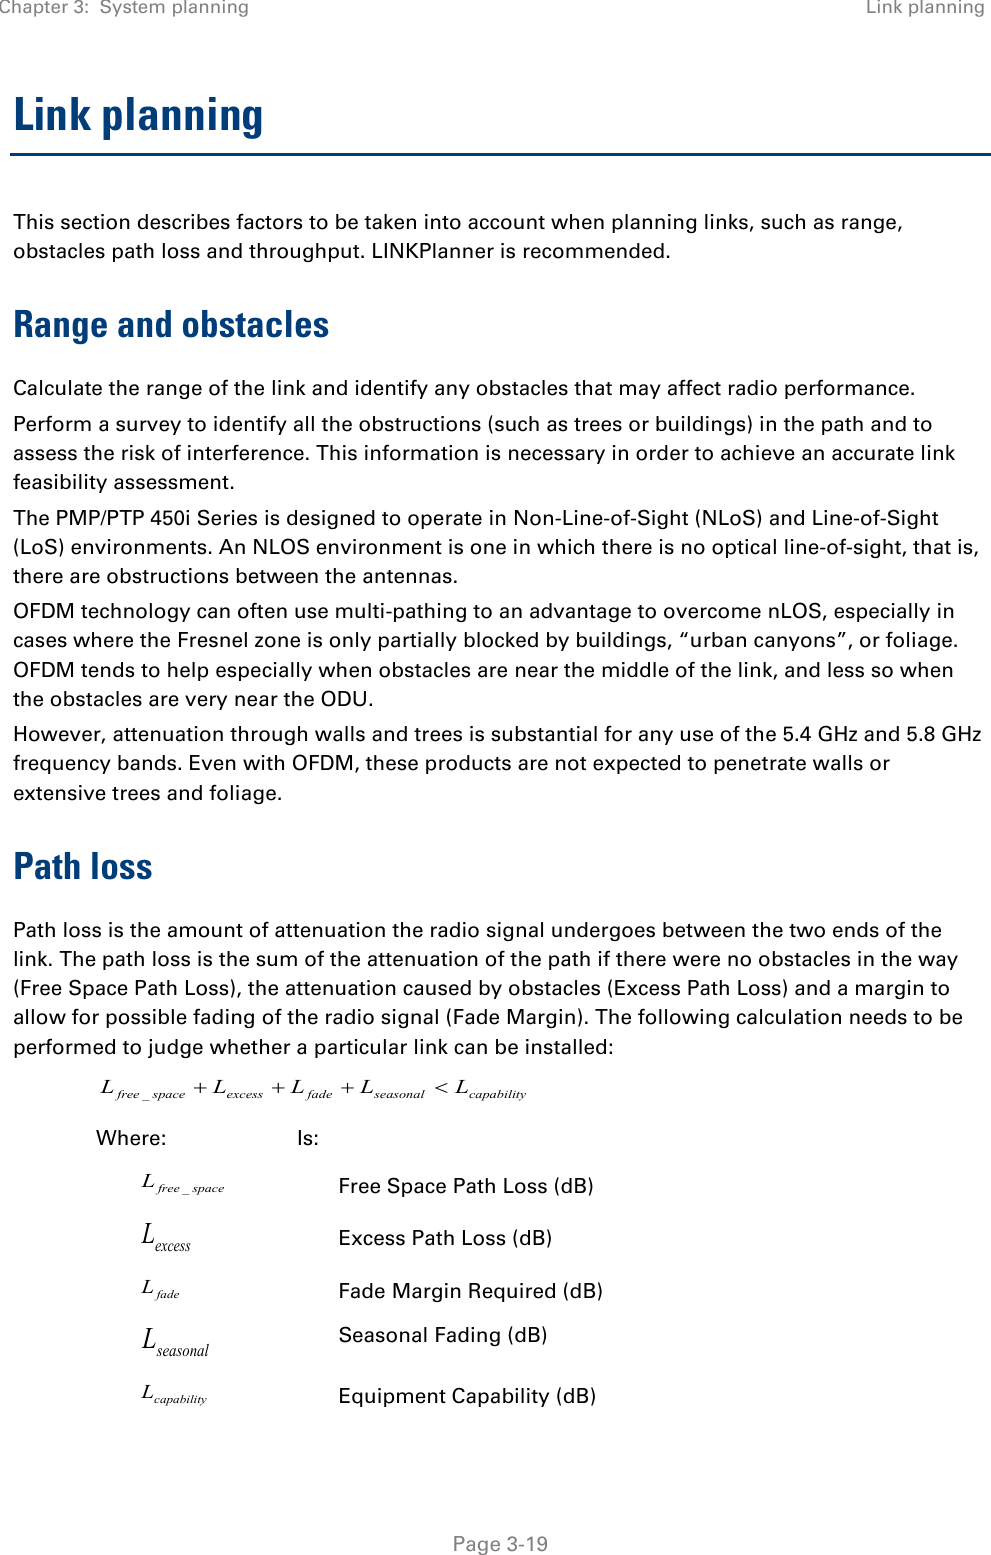 Chapter 3:  System planning Link planning   Page 3-19 Link planning This section describes factors to be taken into account when planning links, such as range, obstacles path loss and throughput. LINKPlanner is recommended. Range and obstacles Calculate the range of the link and identify any obstacles that may affect radio performance. Perform a survey to identify all the obstructions (such as trees or buildings) in the path and to assess the risk of interference. This information is necessary in order to achieve an accurate link feasibility assessment. The PMP/PTP 450i Series is designed to operate in Non-Line-of-Sight (NLoS) and Line-of-Sight (LoS) environments. An NLOS environment is one in which there is no optical line-of-sight, that is, there are obstructions between the antennas. OFDM technology can often use multi-pathing to an advantage to overcome nLOS, especially in cases where the Fresnel zone is only partially blocked by buildings, “urban canyons”, or foliage. OFDM tends to help especially when obstacles are near the middle of the link, and less so when the obstacles are very near the ODU. However, attenuation through walls and trees is substantial for any use of the 5.4 GHz and 5.8 GHz frequency bands. Even with OFDM, these products are not expected to penetrate walls or extensive trees and foliage. Path loss Path loss is the amount of attenuation the radio signal undergoes between the two ends of the link. The path loss is the sum of the attenuation of the path if there were no obstacles in the way (Free Space Path Loss), the attenuation caused by obstacles (Excess Path Loss) and a margin to allow for possible fading of the radio signal (Fade Margin). The following calculation needs to be performed to judge whether a particular link can be installed: capabilityseasonalfadeexcessspacefree LLLLL &lt;+++_ Where:  Is: spacefreeL_ Free Space Path Loss (dB) excessL Excess Path Loss (dB) fadeL Fade Margin Required (dB) seasonalL Seasonal Fading (dB) capabilityL Equipment Capability (dB) 